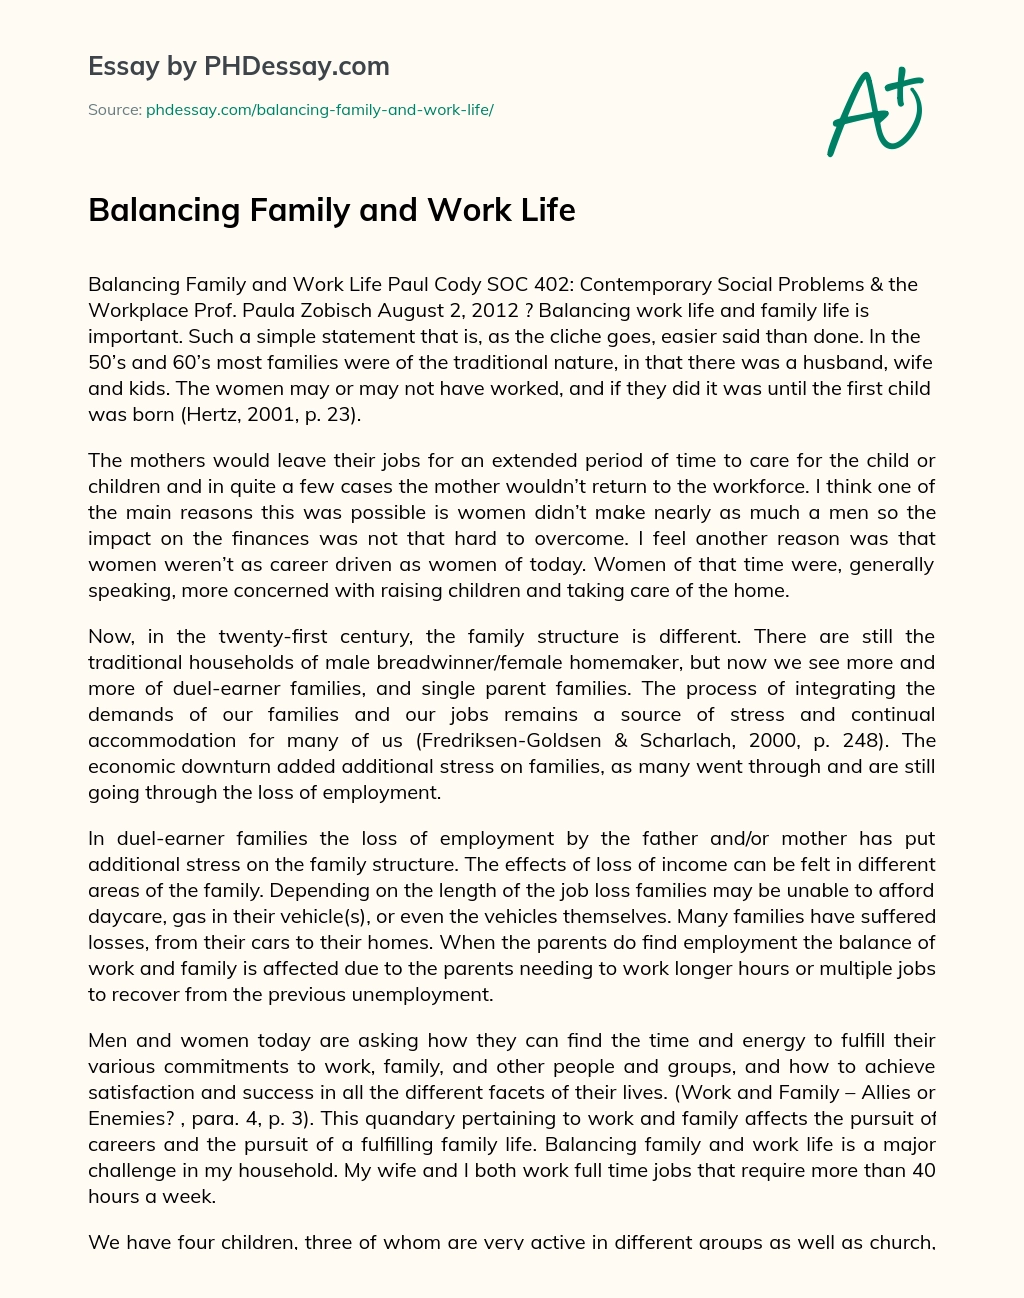 Balancing Family and Work Life essay